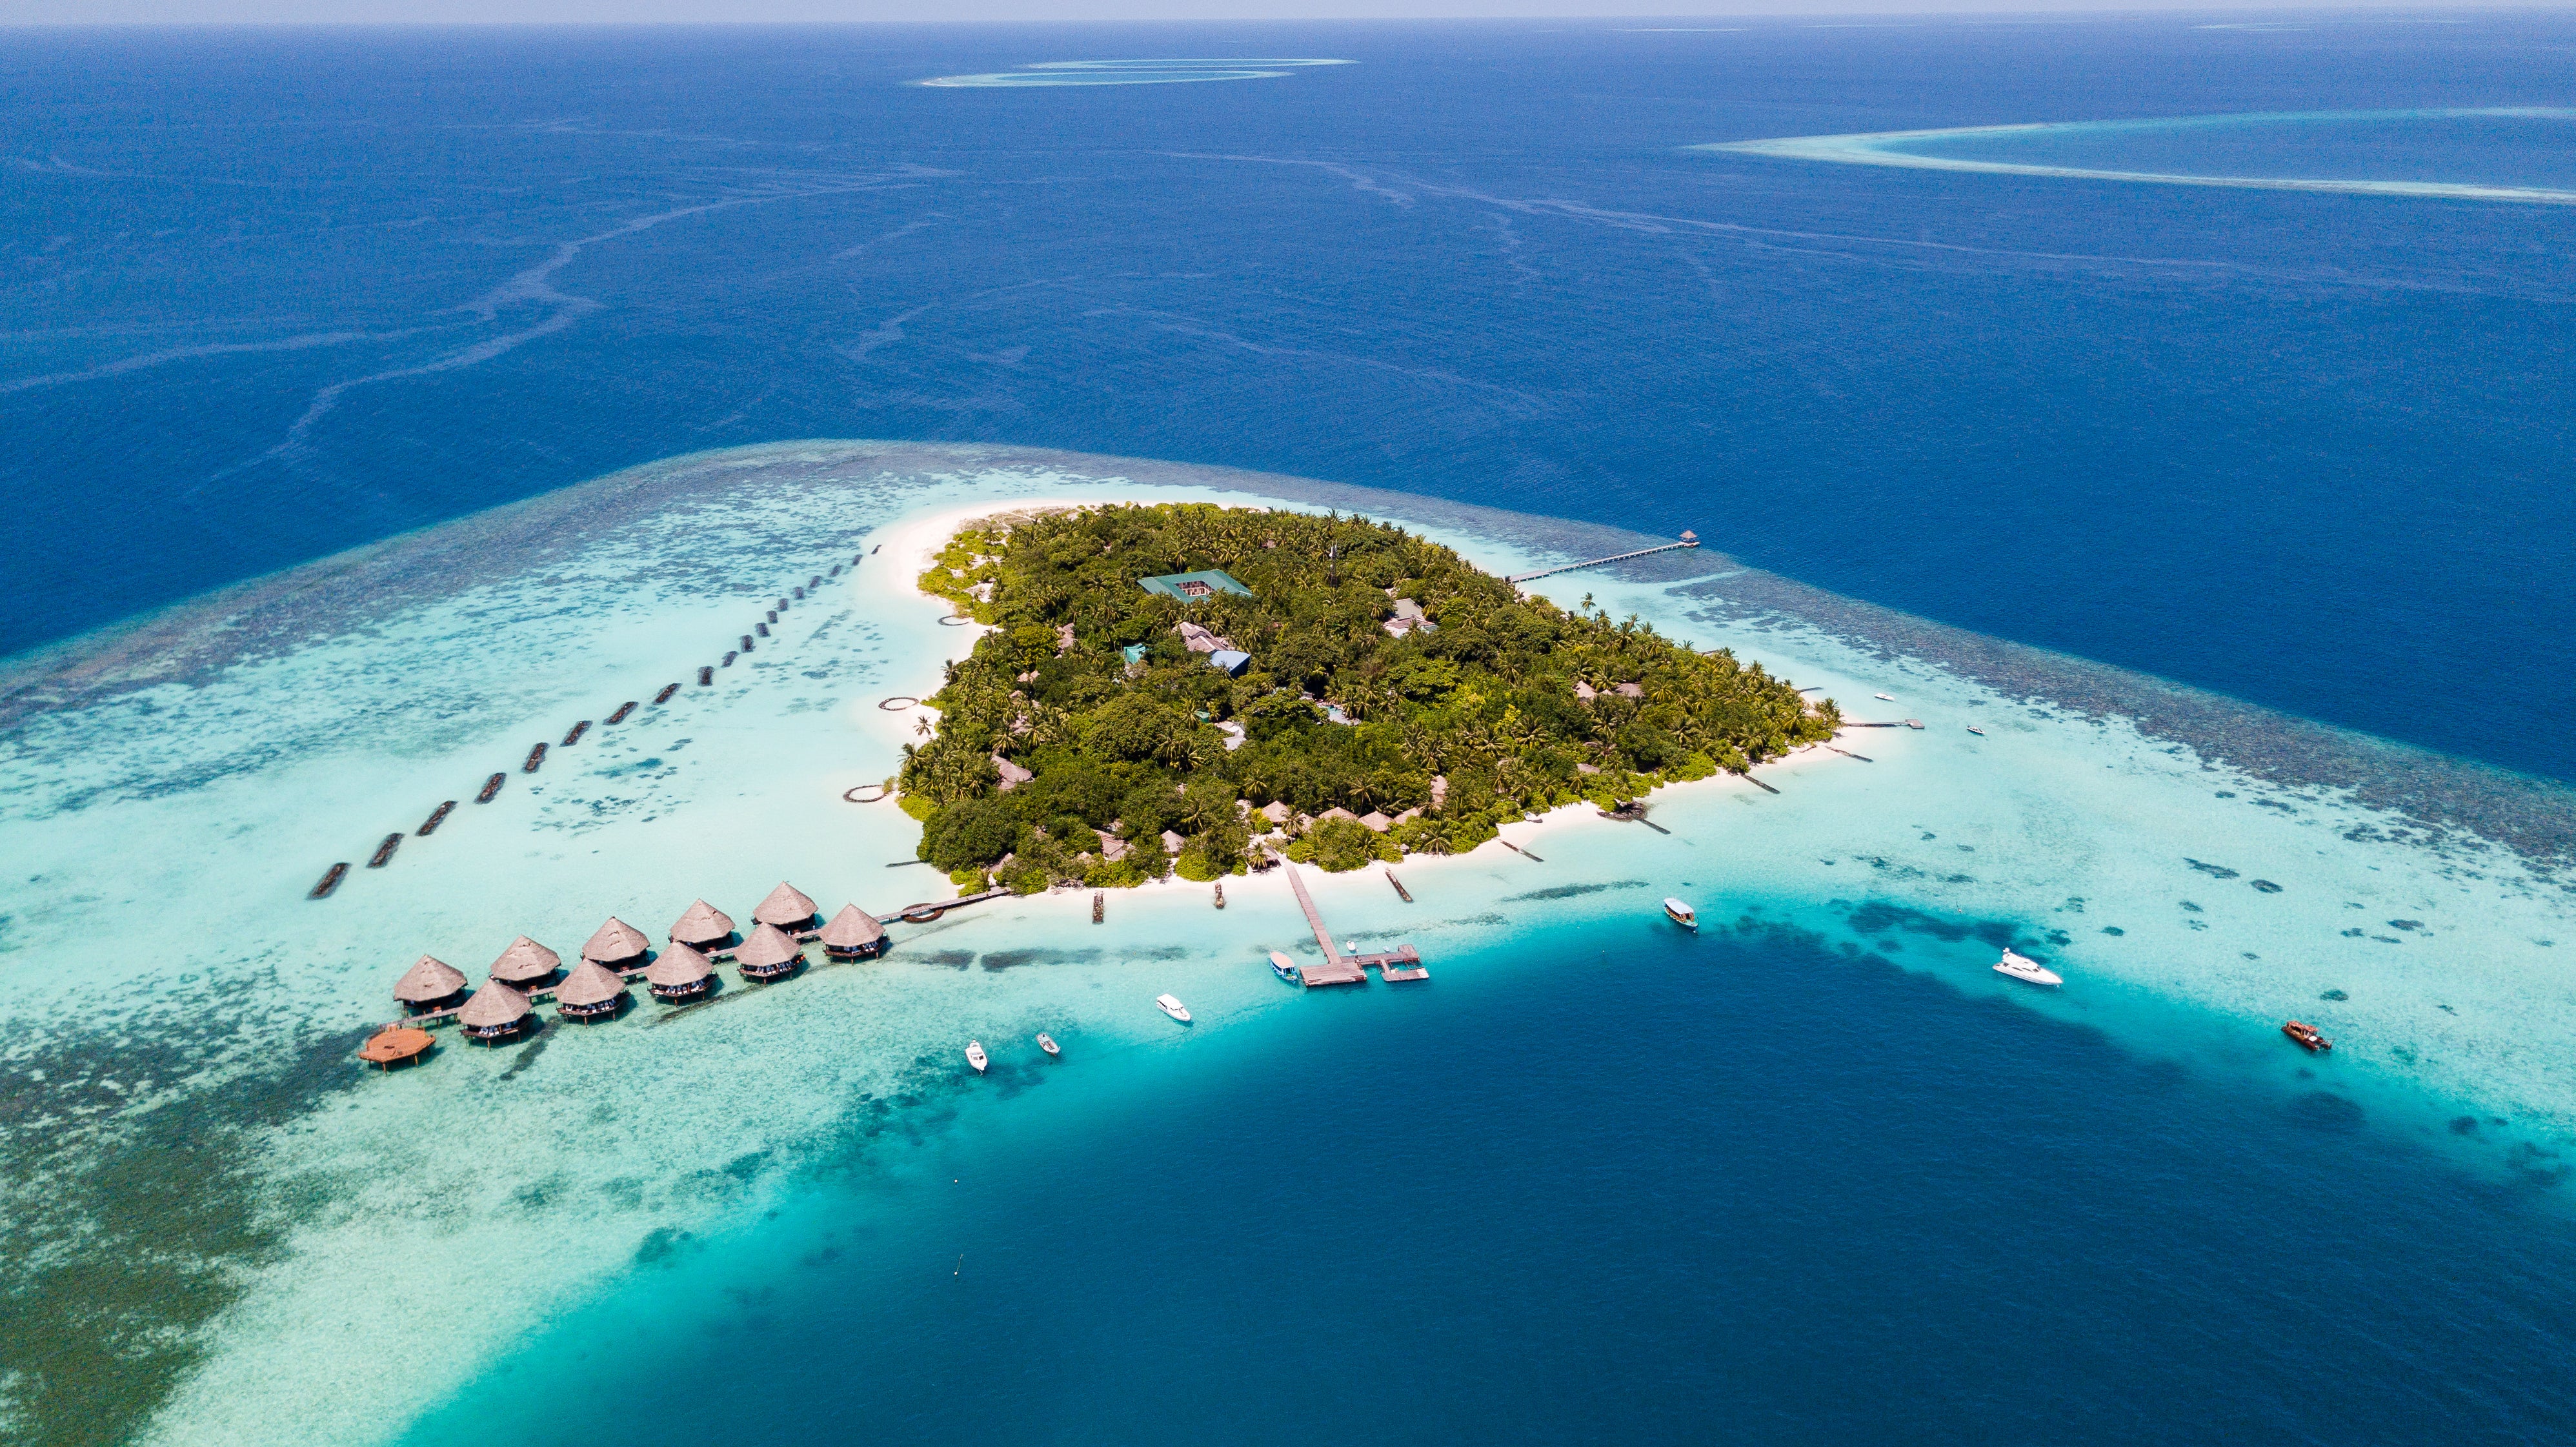 The exclusive hideaway is located on Kunfunadhoo island and is offering a hard-to-resist package